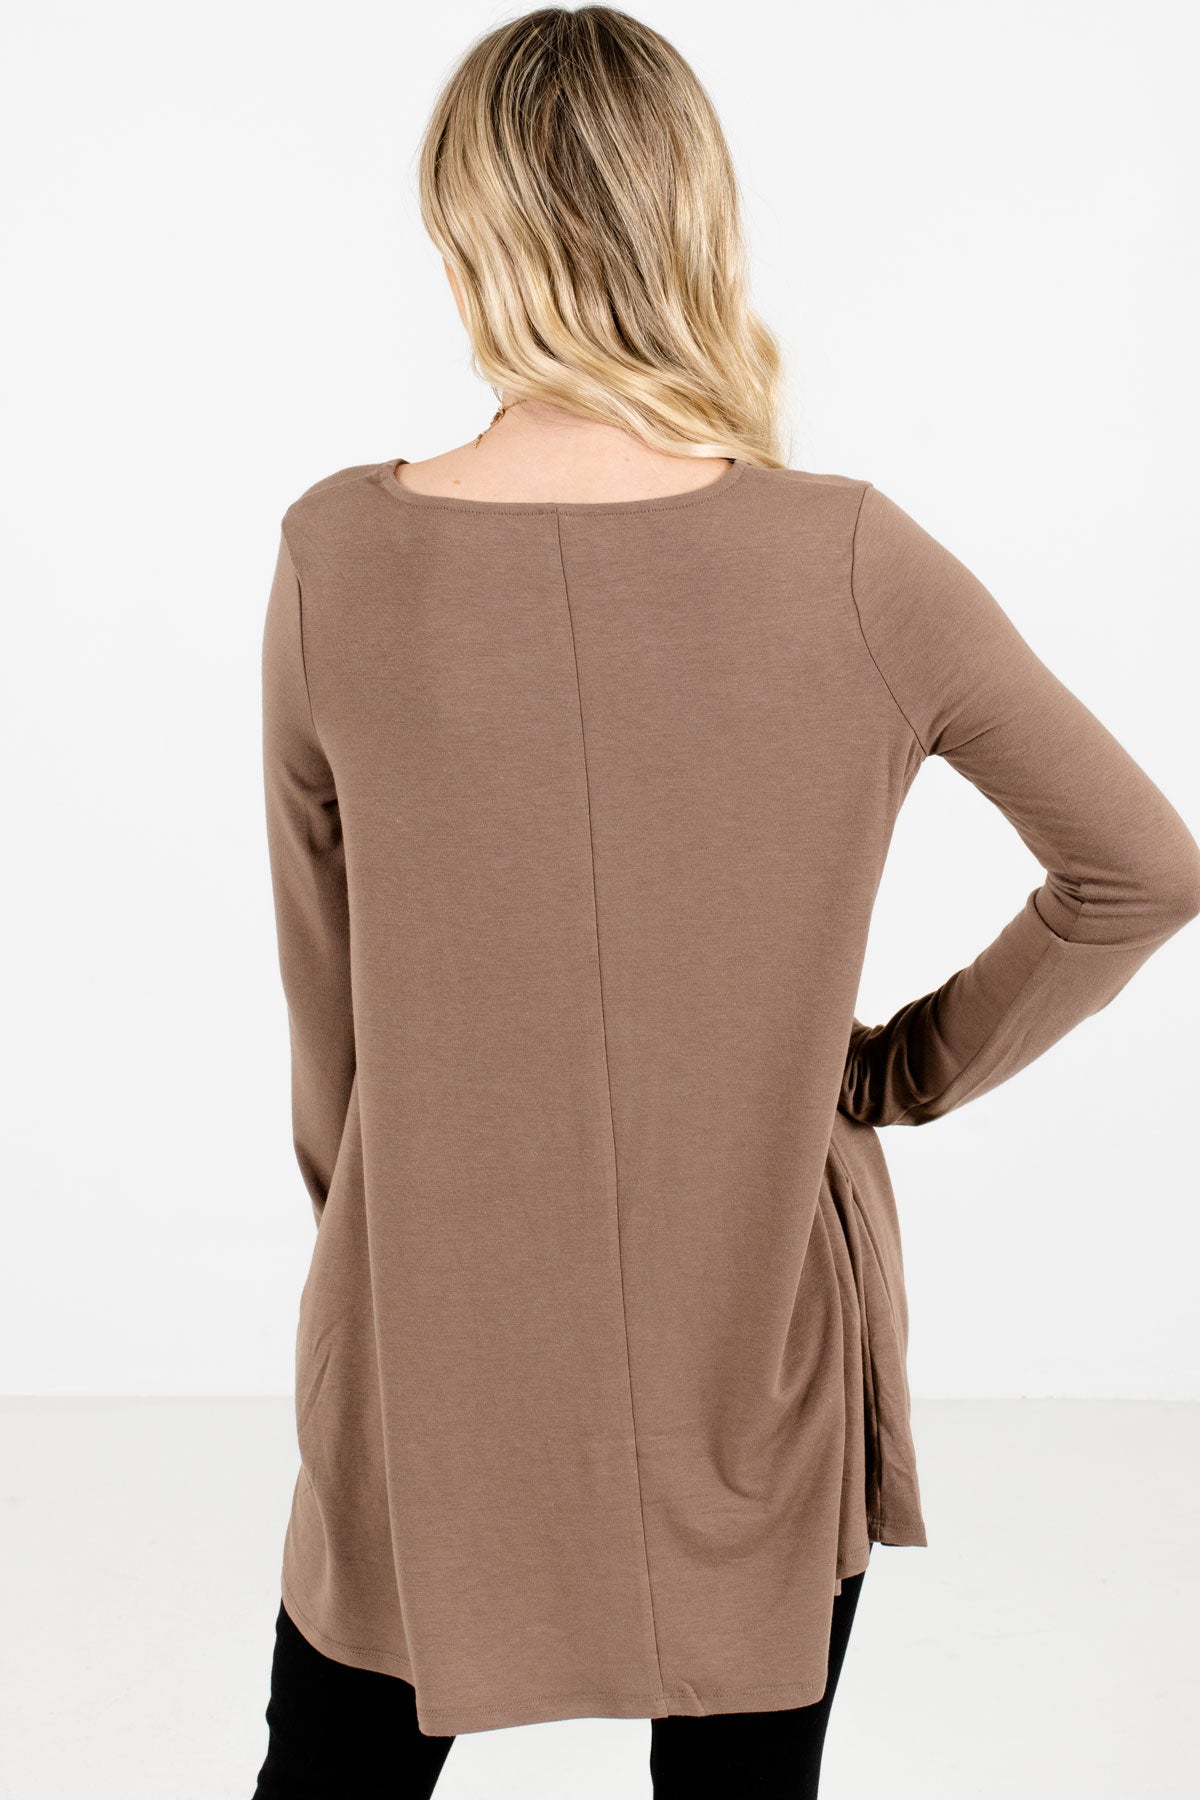 Women's Brown Boutique Top with Pockets